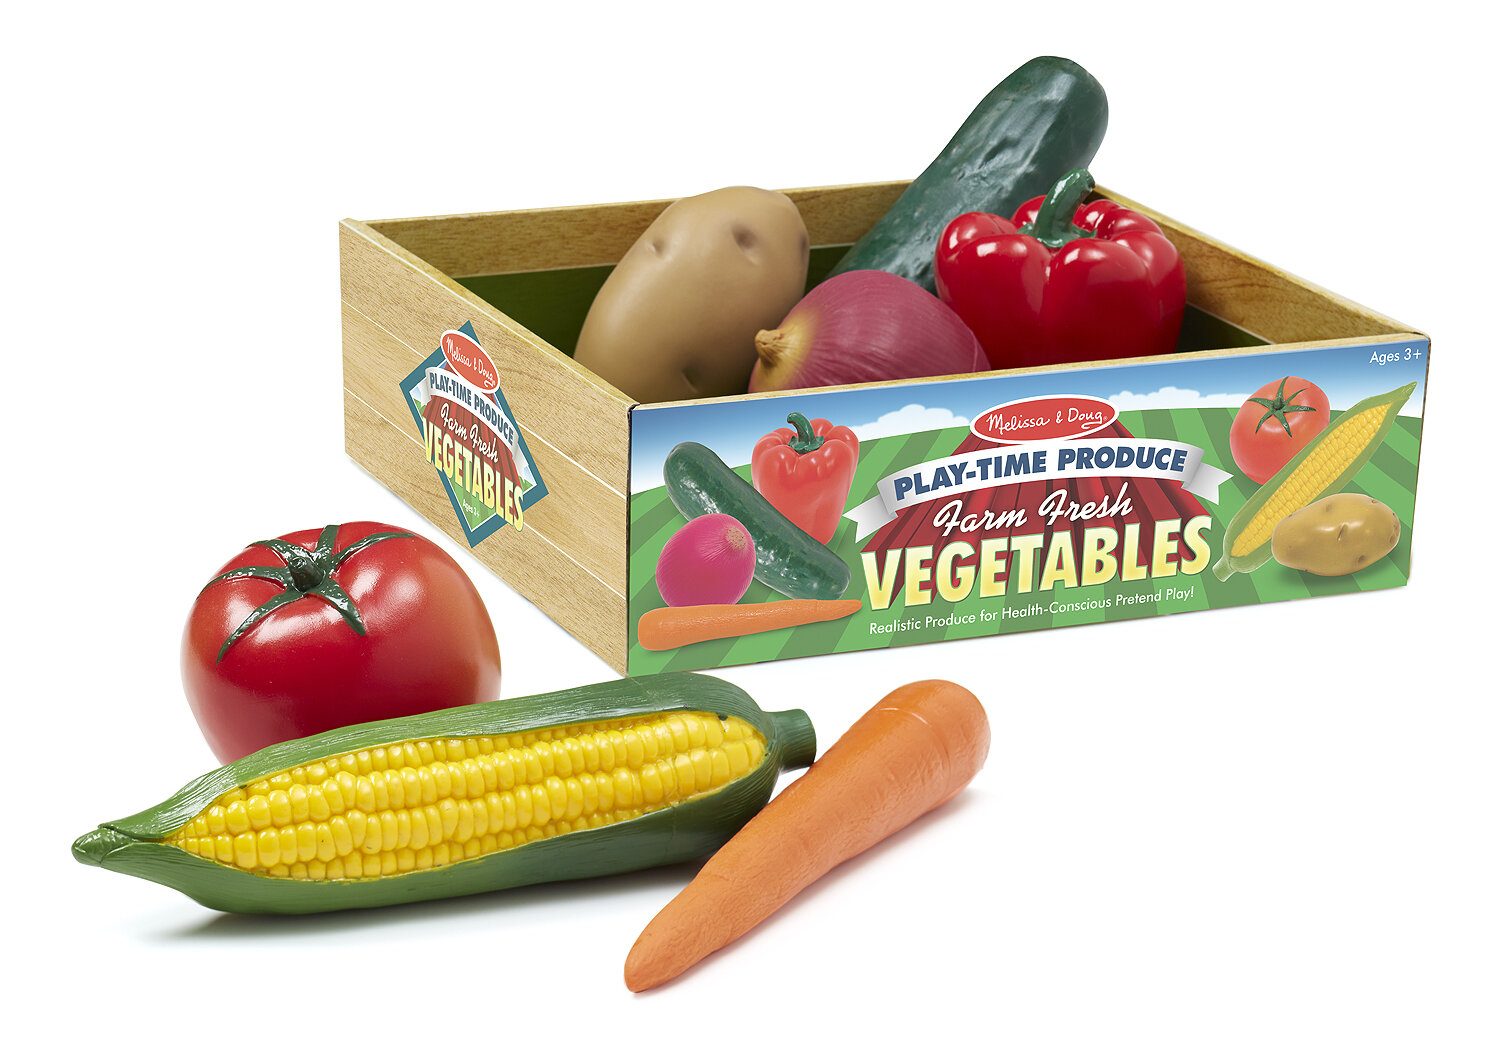 Melissa & Doug Play-time Produce Vegetables 4083 Play Food for sale online